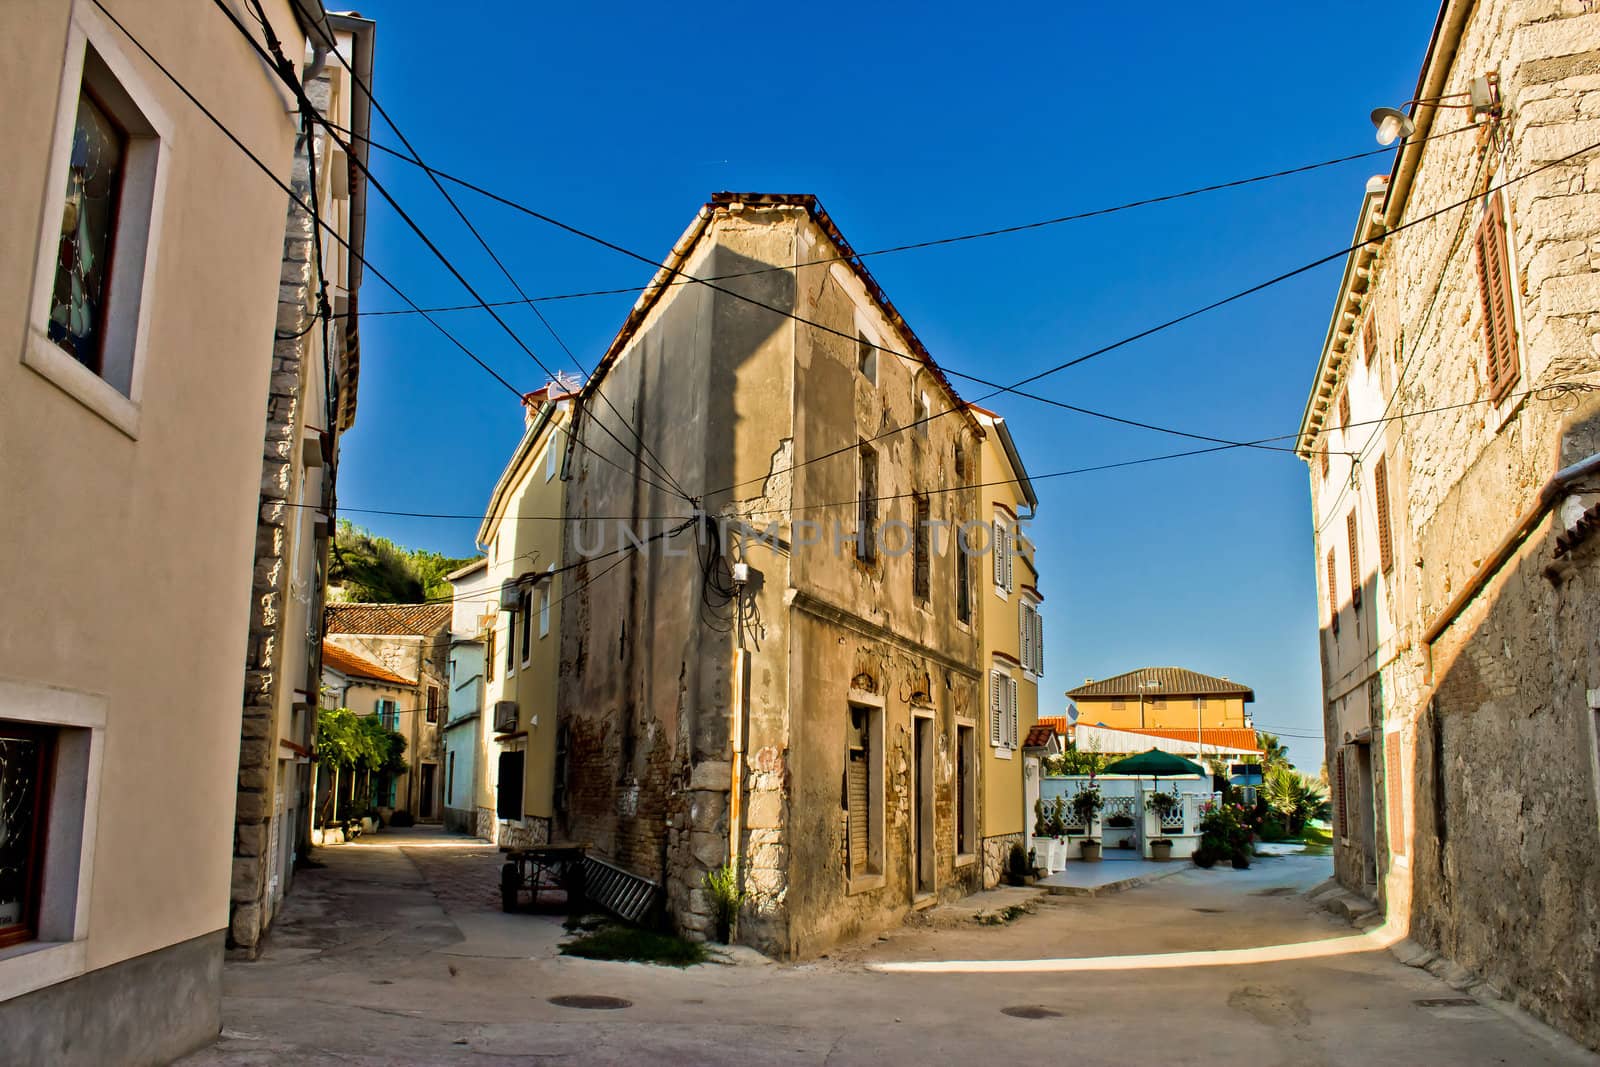 Narrow streets of Susak - traditional dalmatian architecture by xbrchx